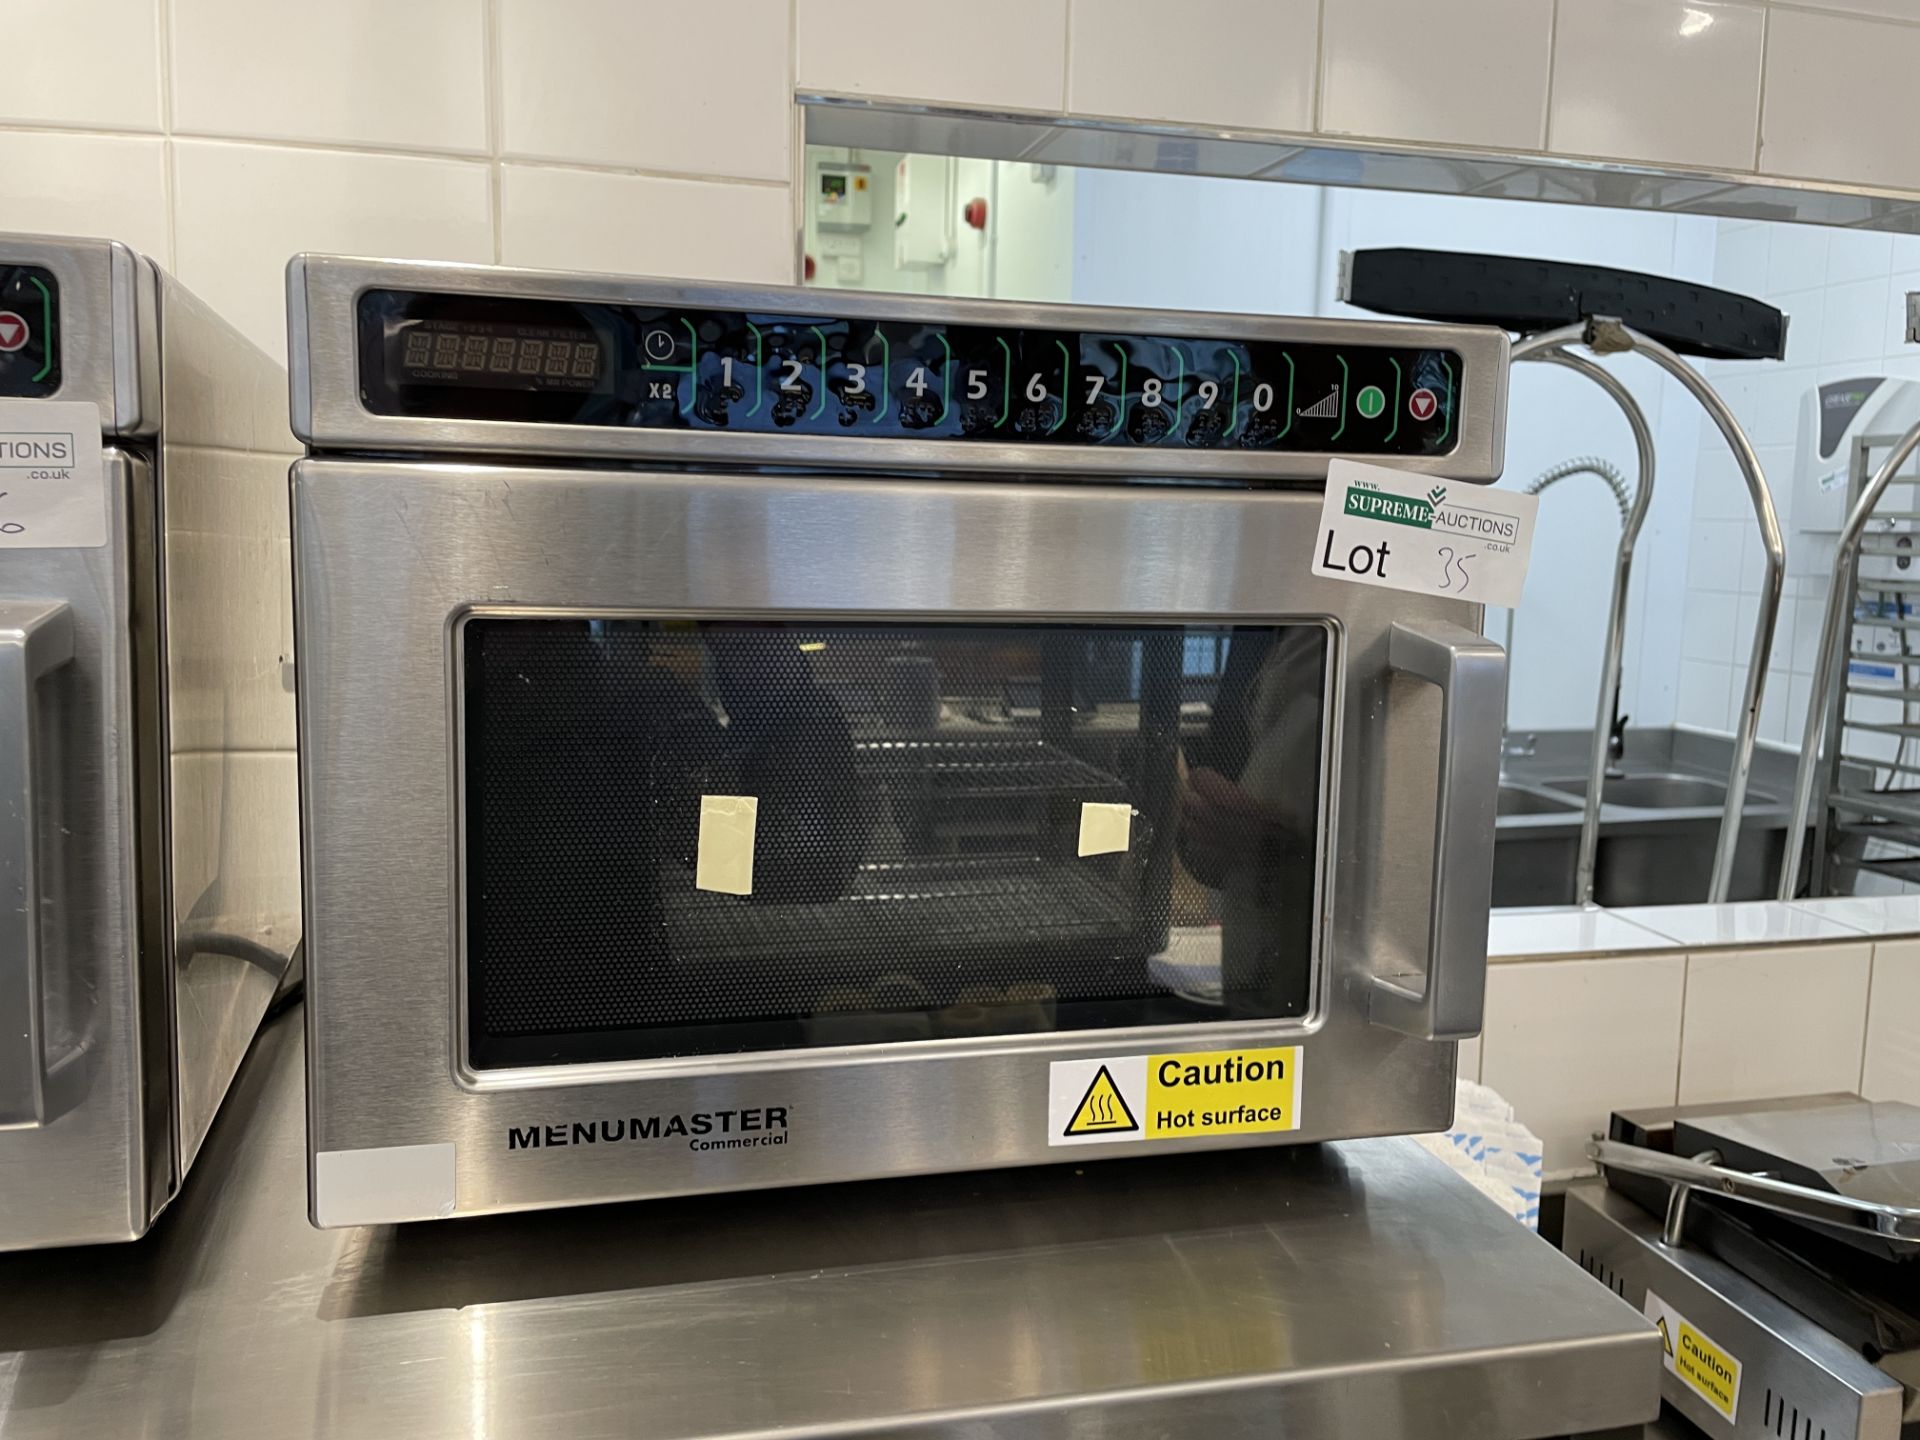 STAINLESS STEEL MENU MASTER COMMERCIAL MICROWAVE